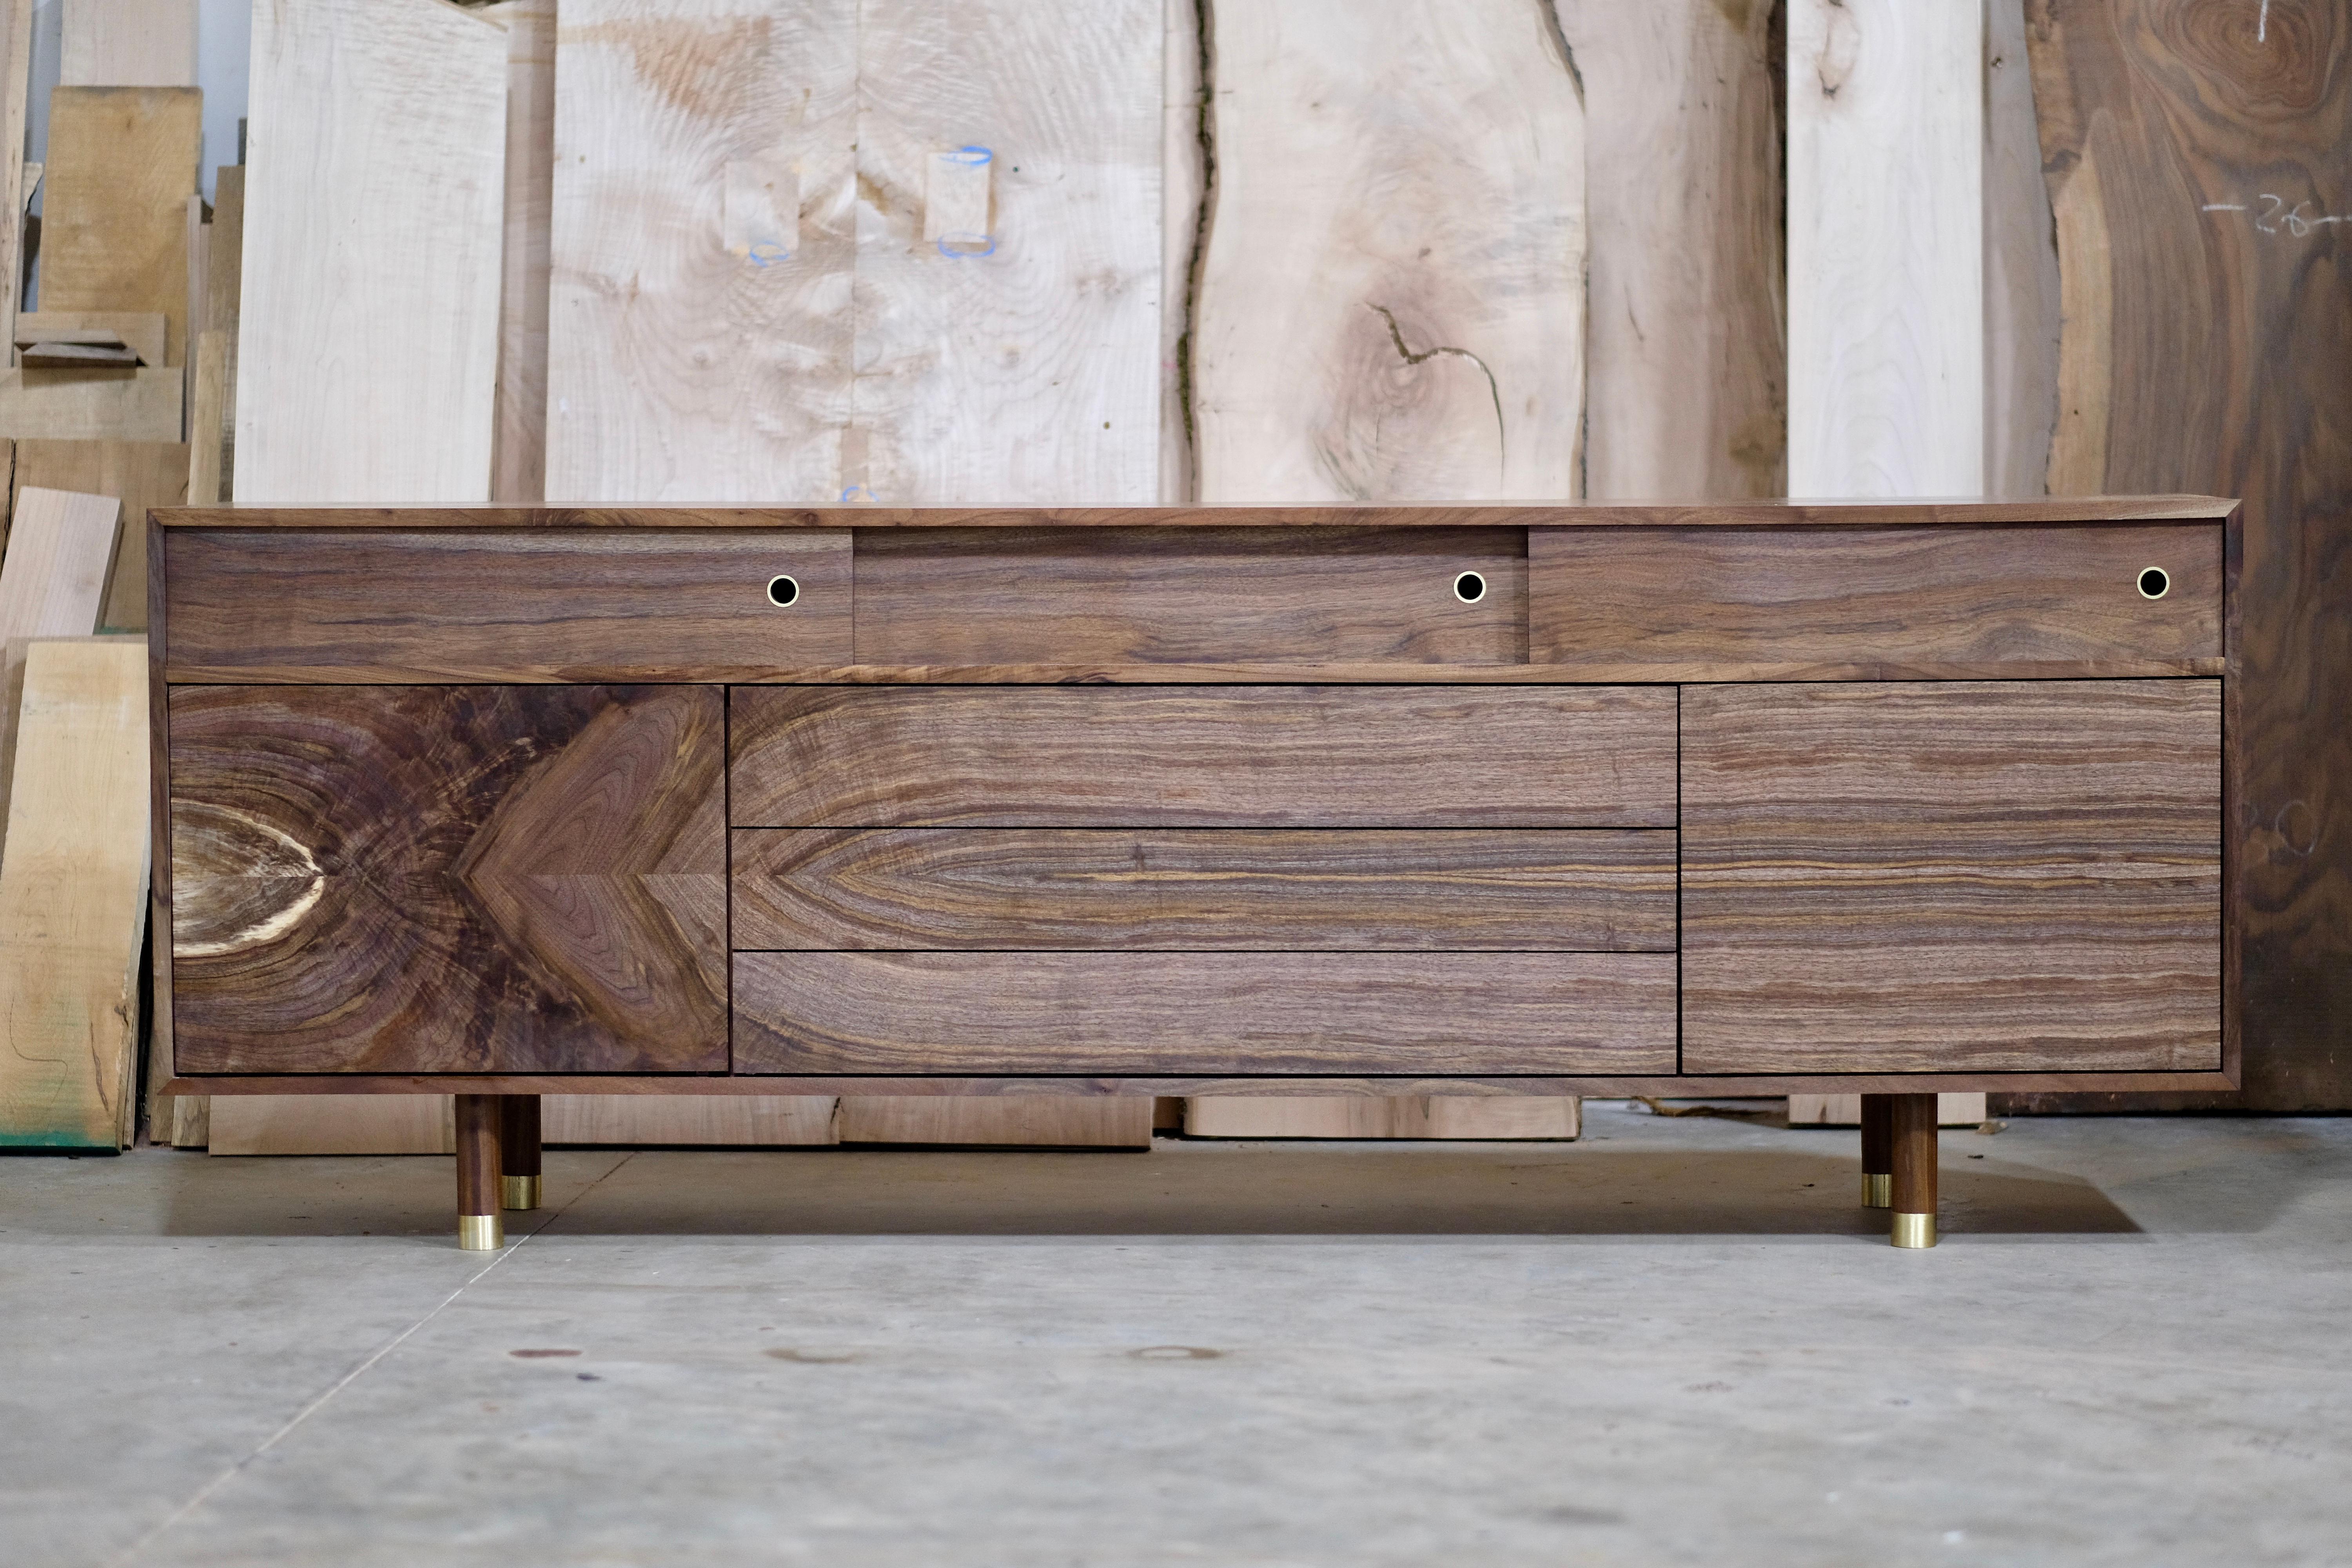 This is a piece that truly speaks for itself. The fully grain matched solid wood walnut facade brings warmth and depth to this otherwise very simple silhouette. The custom made brass feet and drawer pulls on the sliding doors compliment the walnut